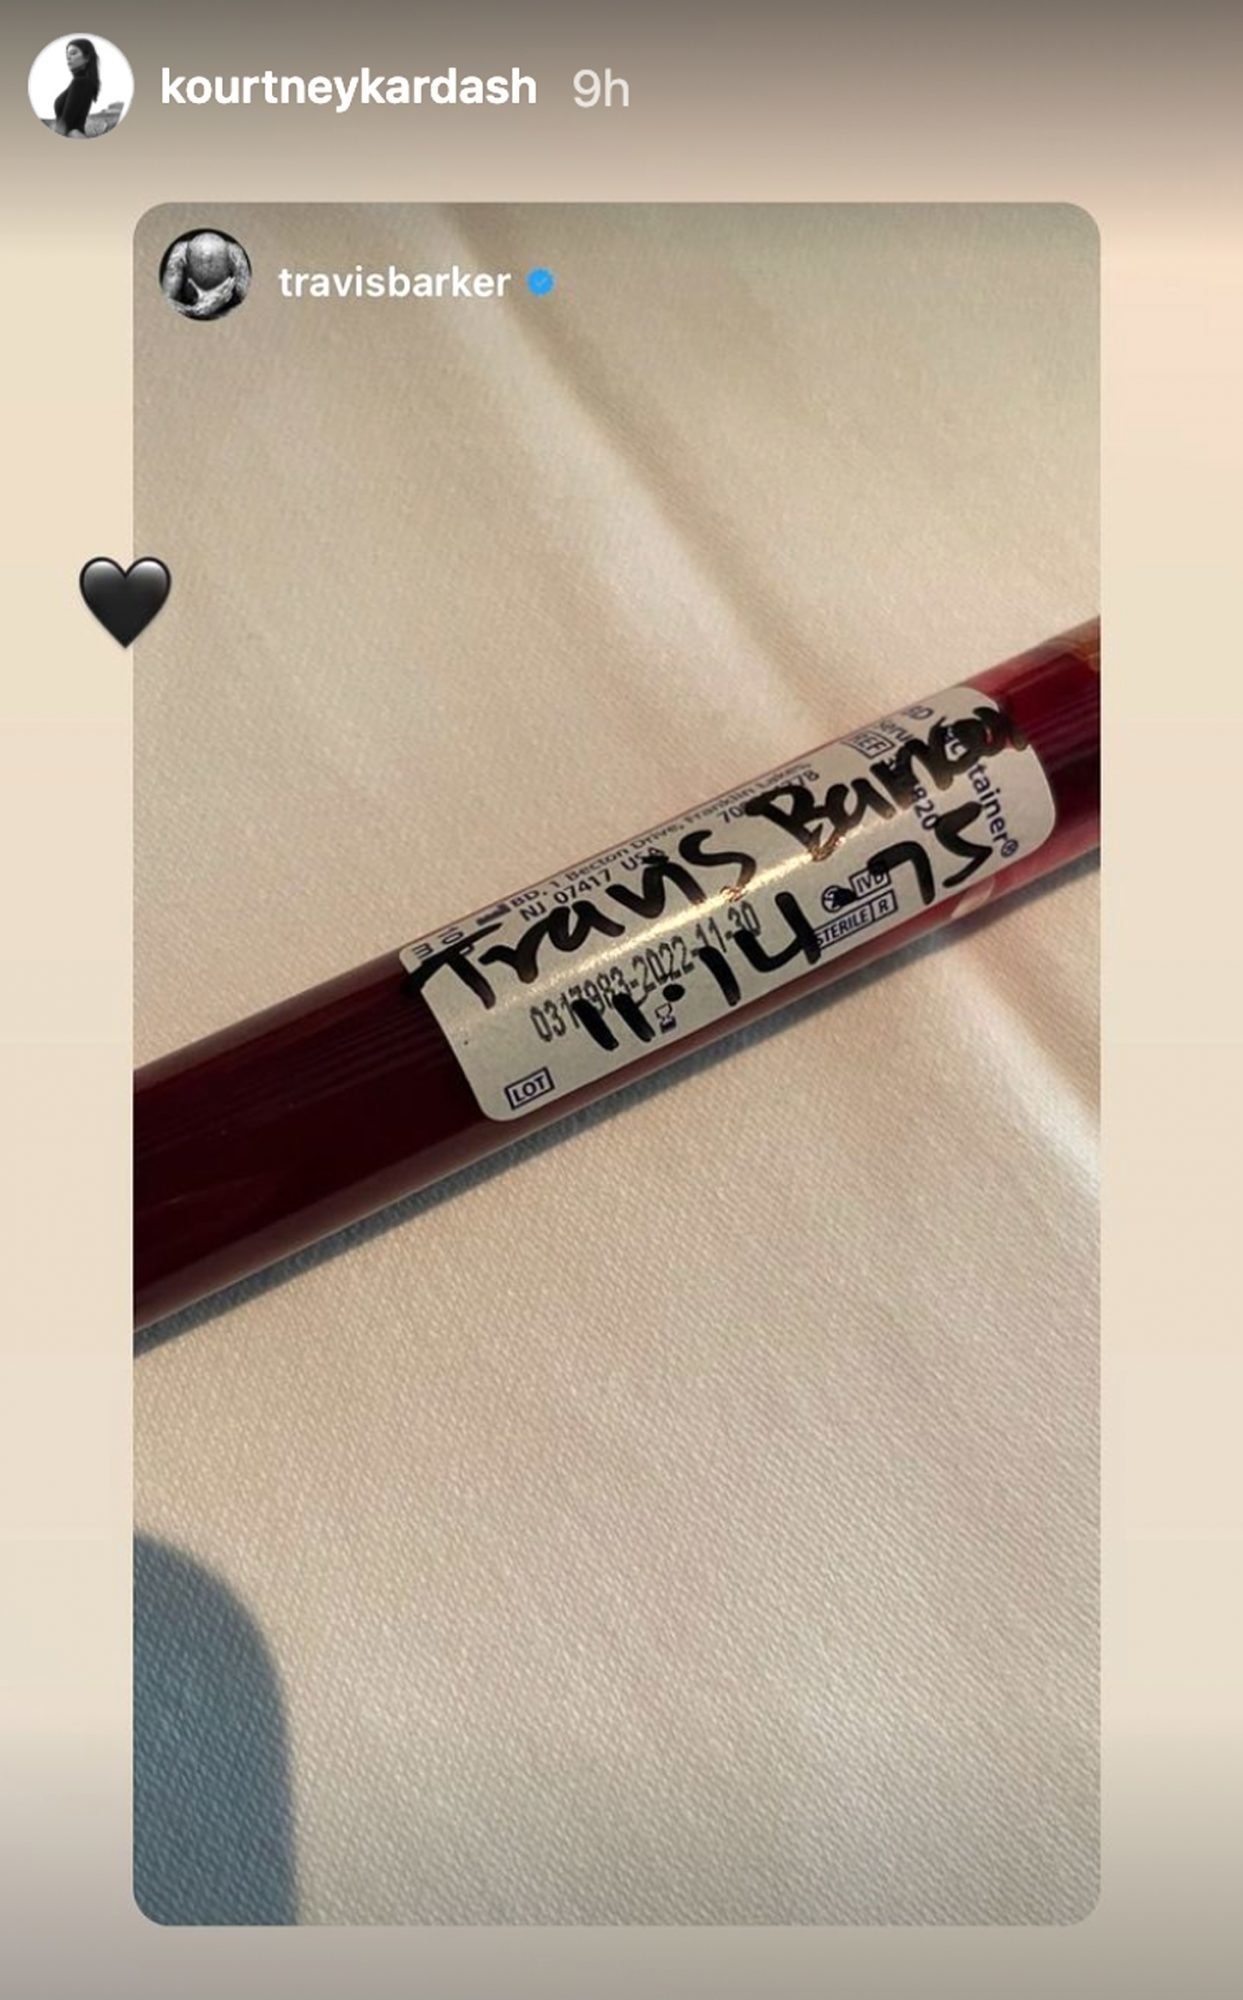 A screenshot of Travis&#x27; blood vial that Kourtney captioned with a black heart